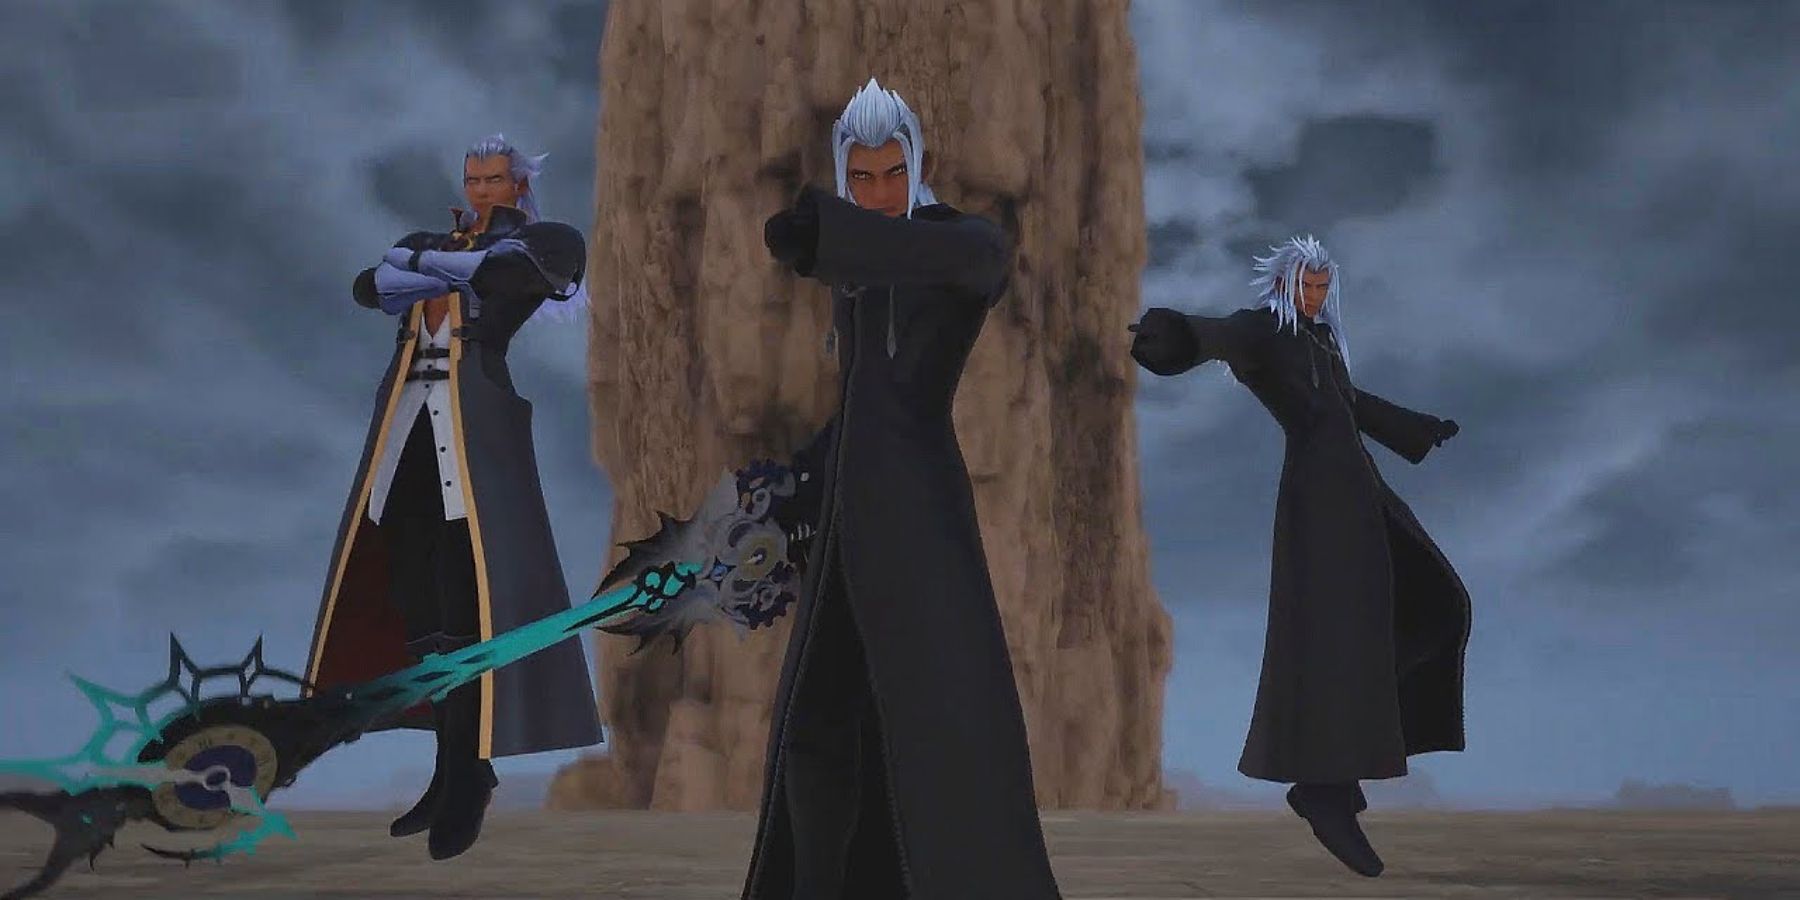 Ansem, Young Xehanort, and Xemnas in Kingdom Hearts 3